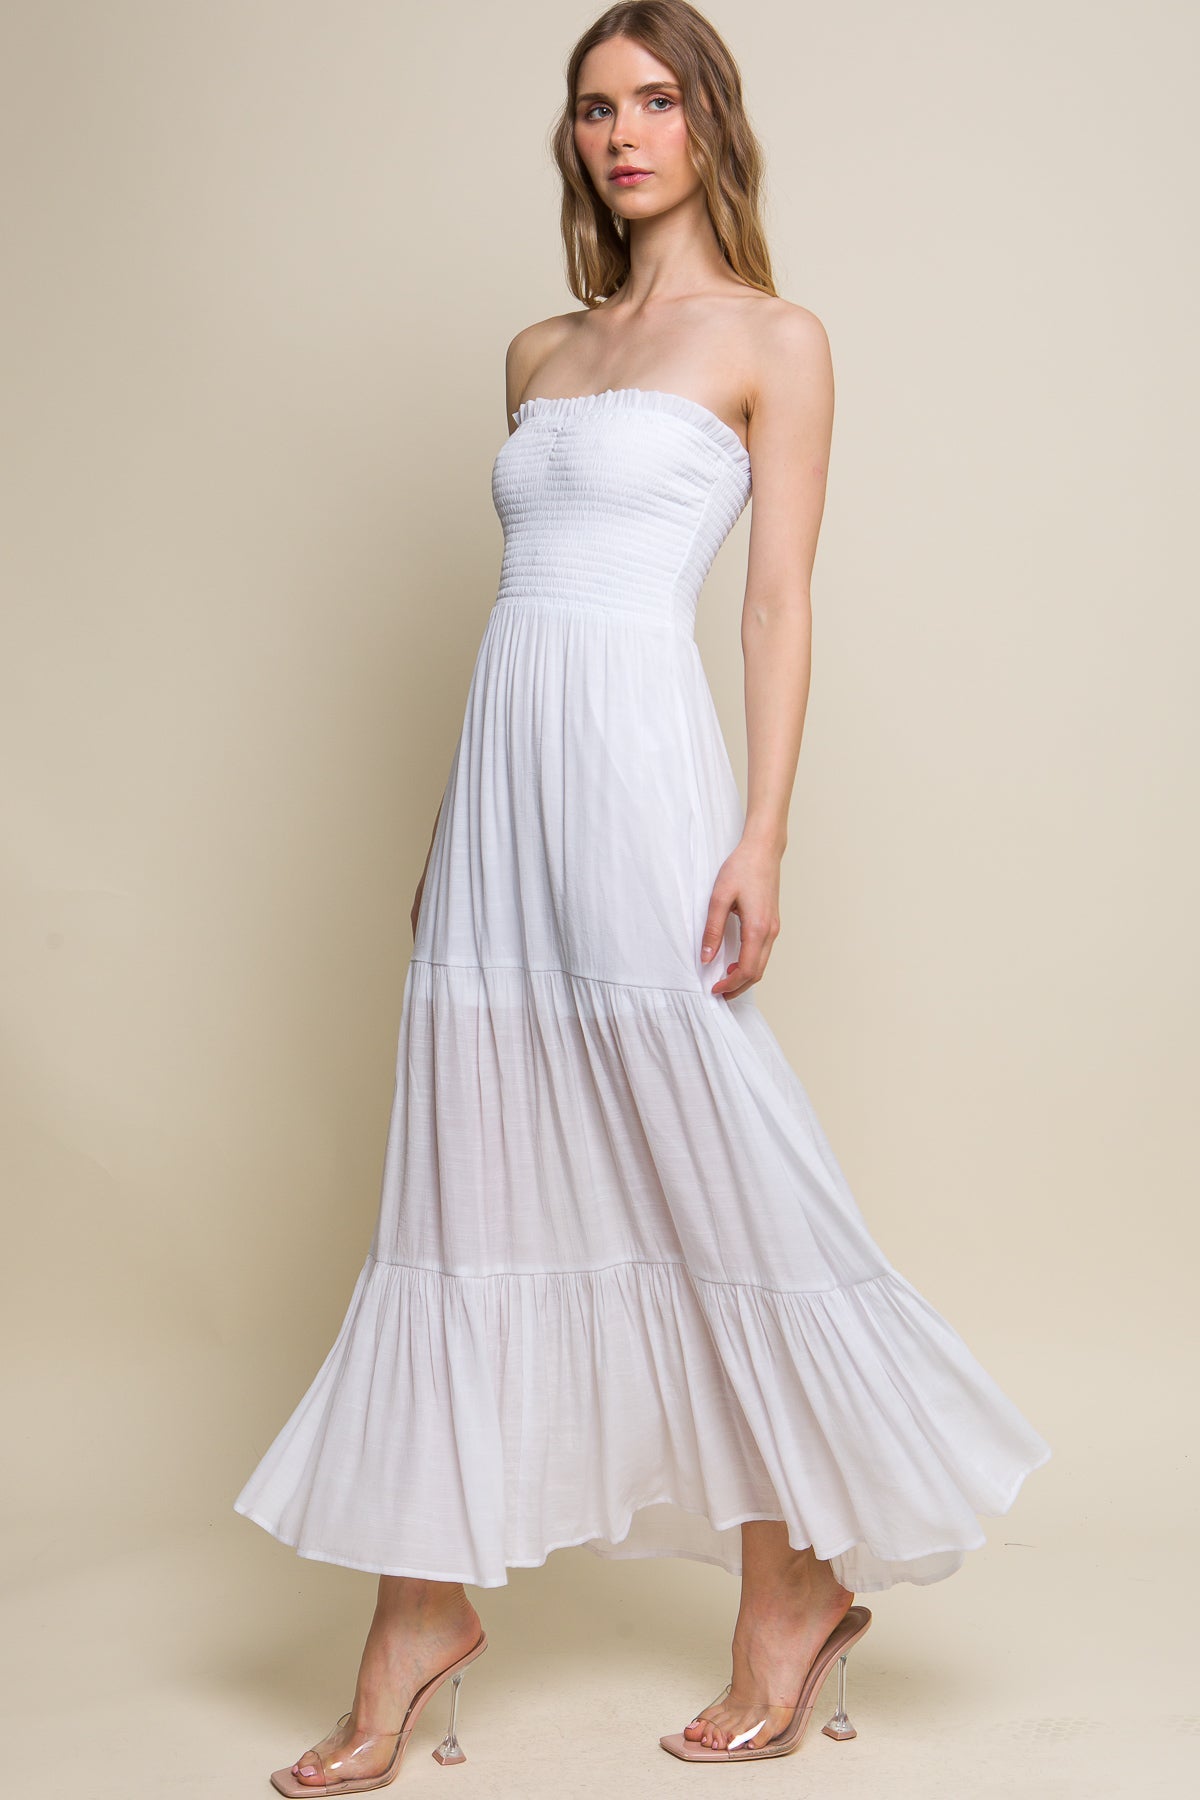 - Light Flow Strapless Maxi Dress - 6 colors - ships from The US - womens dress at TFC&H Co.